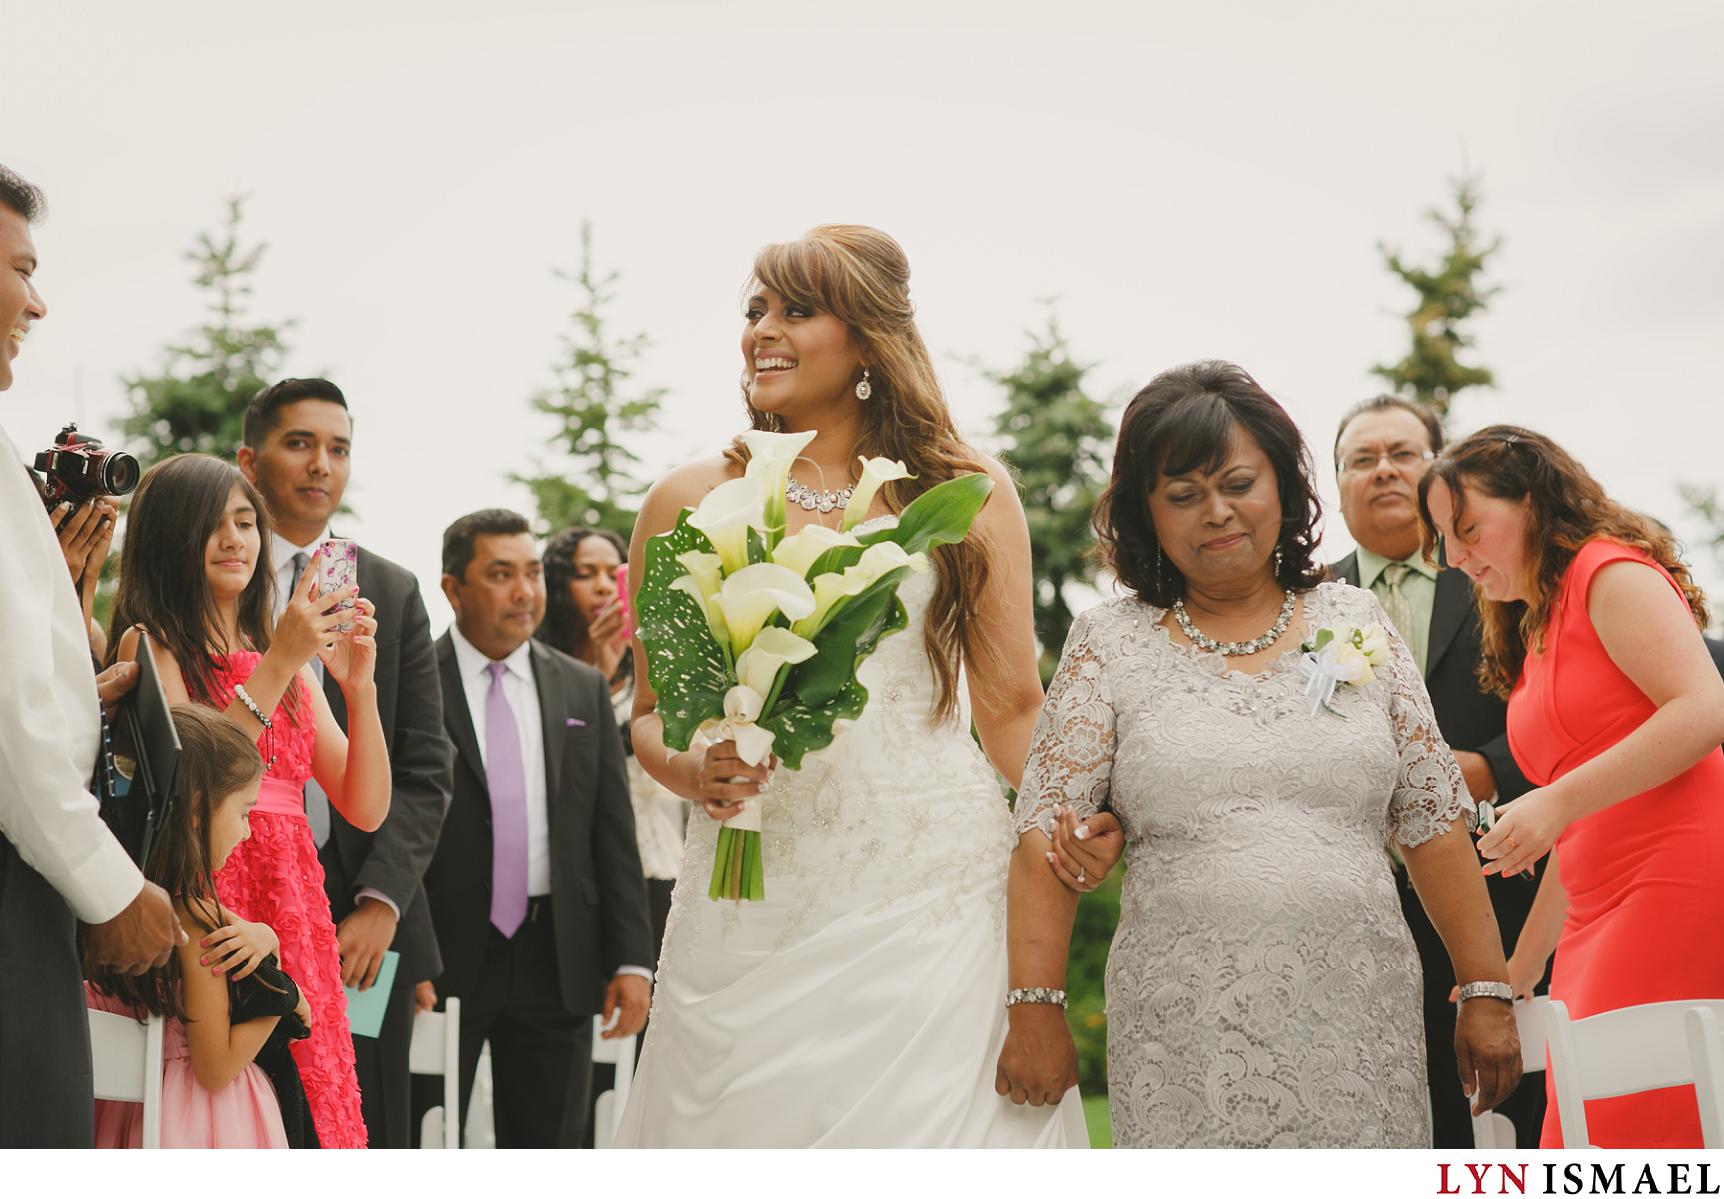 A mother walks down the aisle with her daughter to give her away on her wedding day.